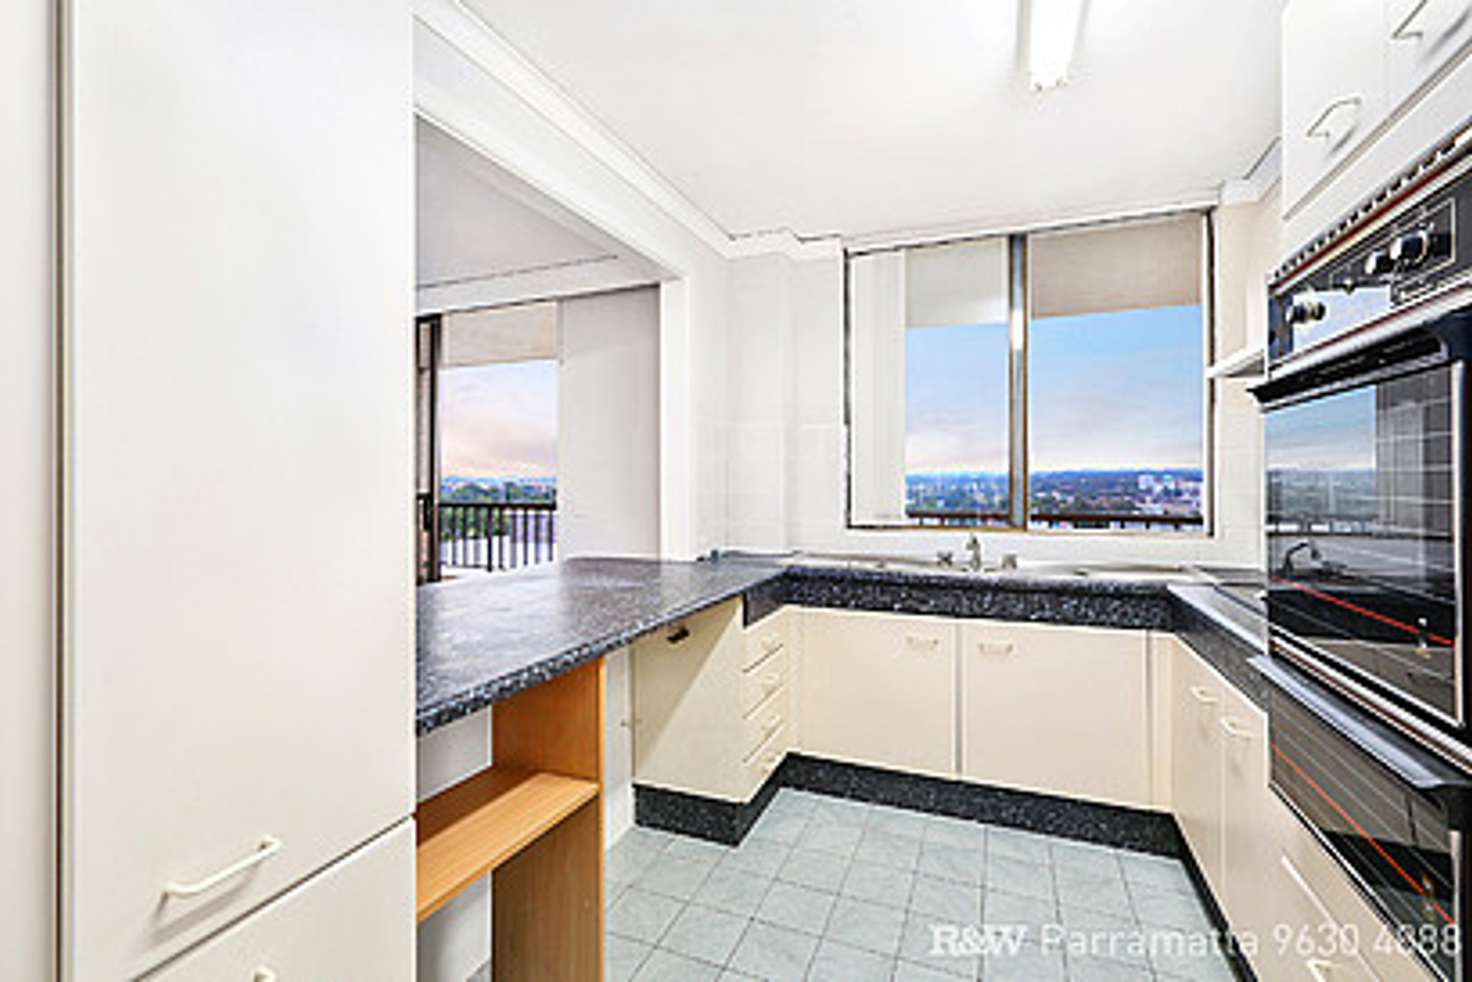 Main view of Homely unit listing, 51/68-70 Great Western Highway, Parramatta NSW 2150